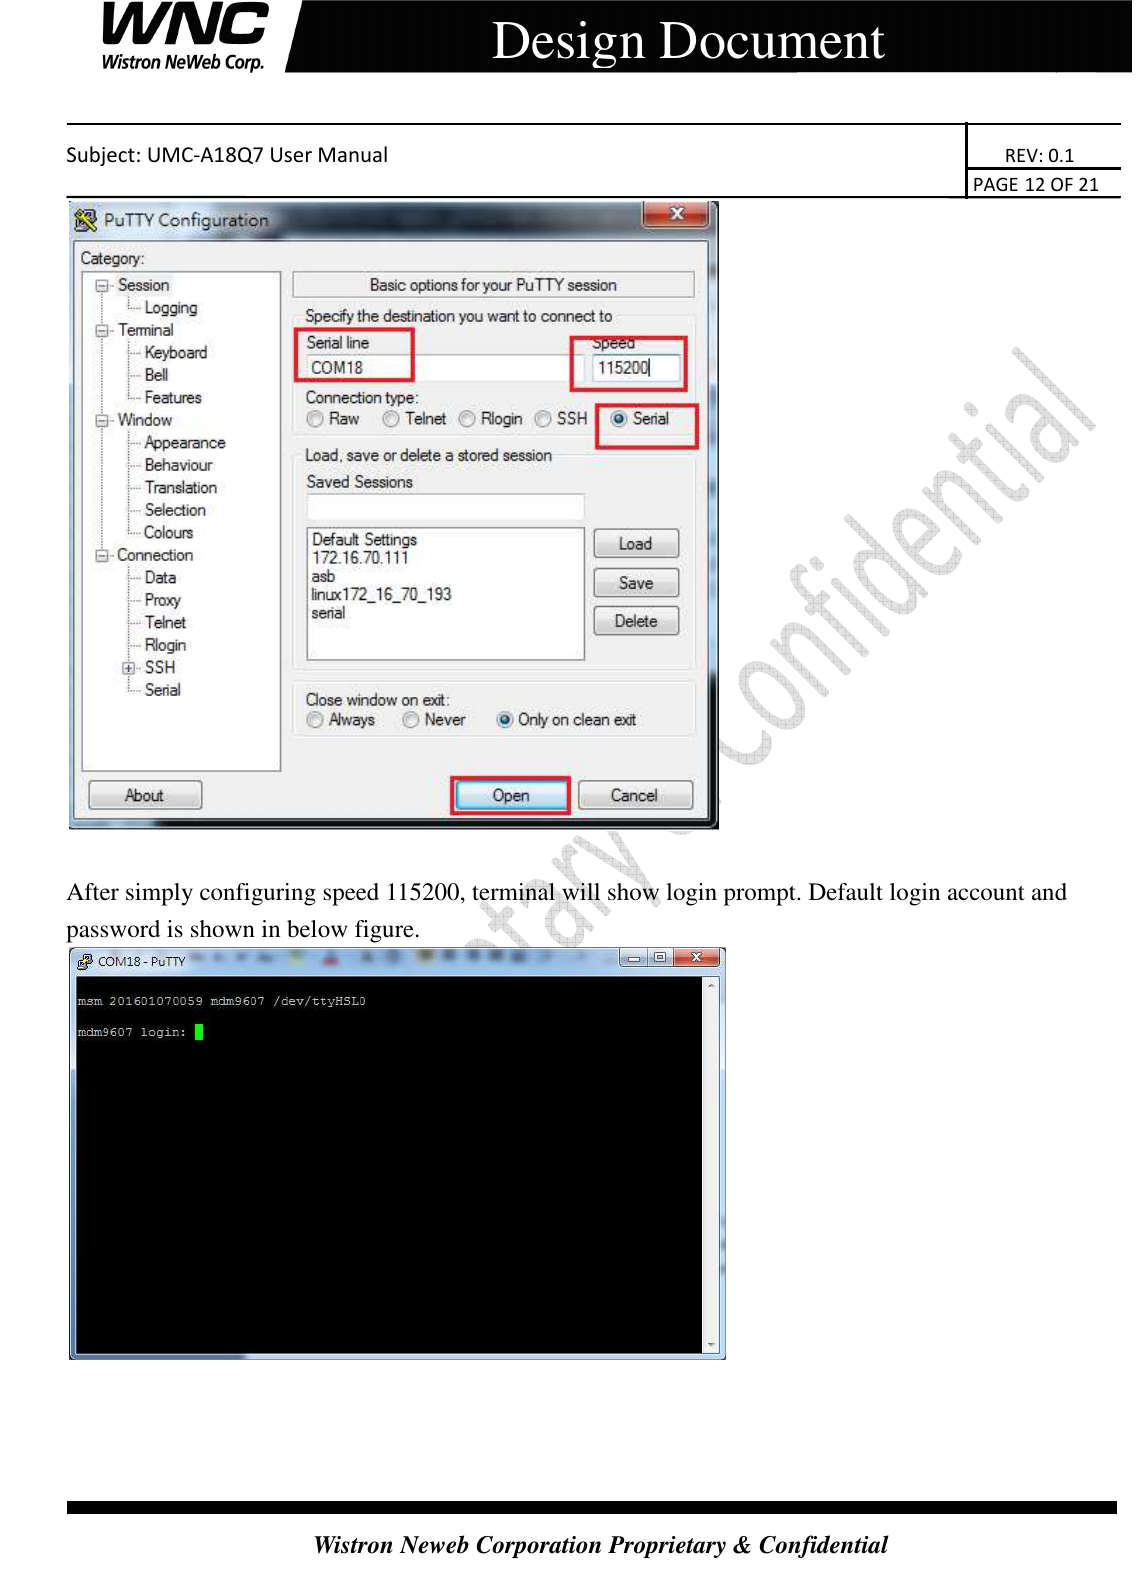    Subject: UMC-A18Q7 User Manual                                                                       REV: 0.1                                                                                                                                                                               PAGE 12 OF 21  Wistron Neweb Corporation Proprietary &amp; Confidential     Design Document   After simply configuring speed 115200, terminal will show login prompt. Default login account and password is shown in below figure.     